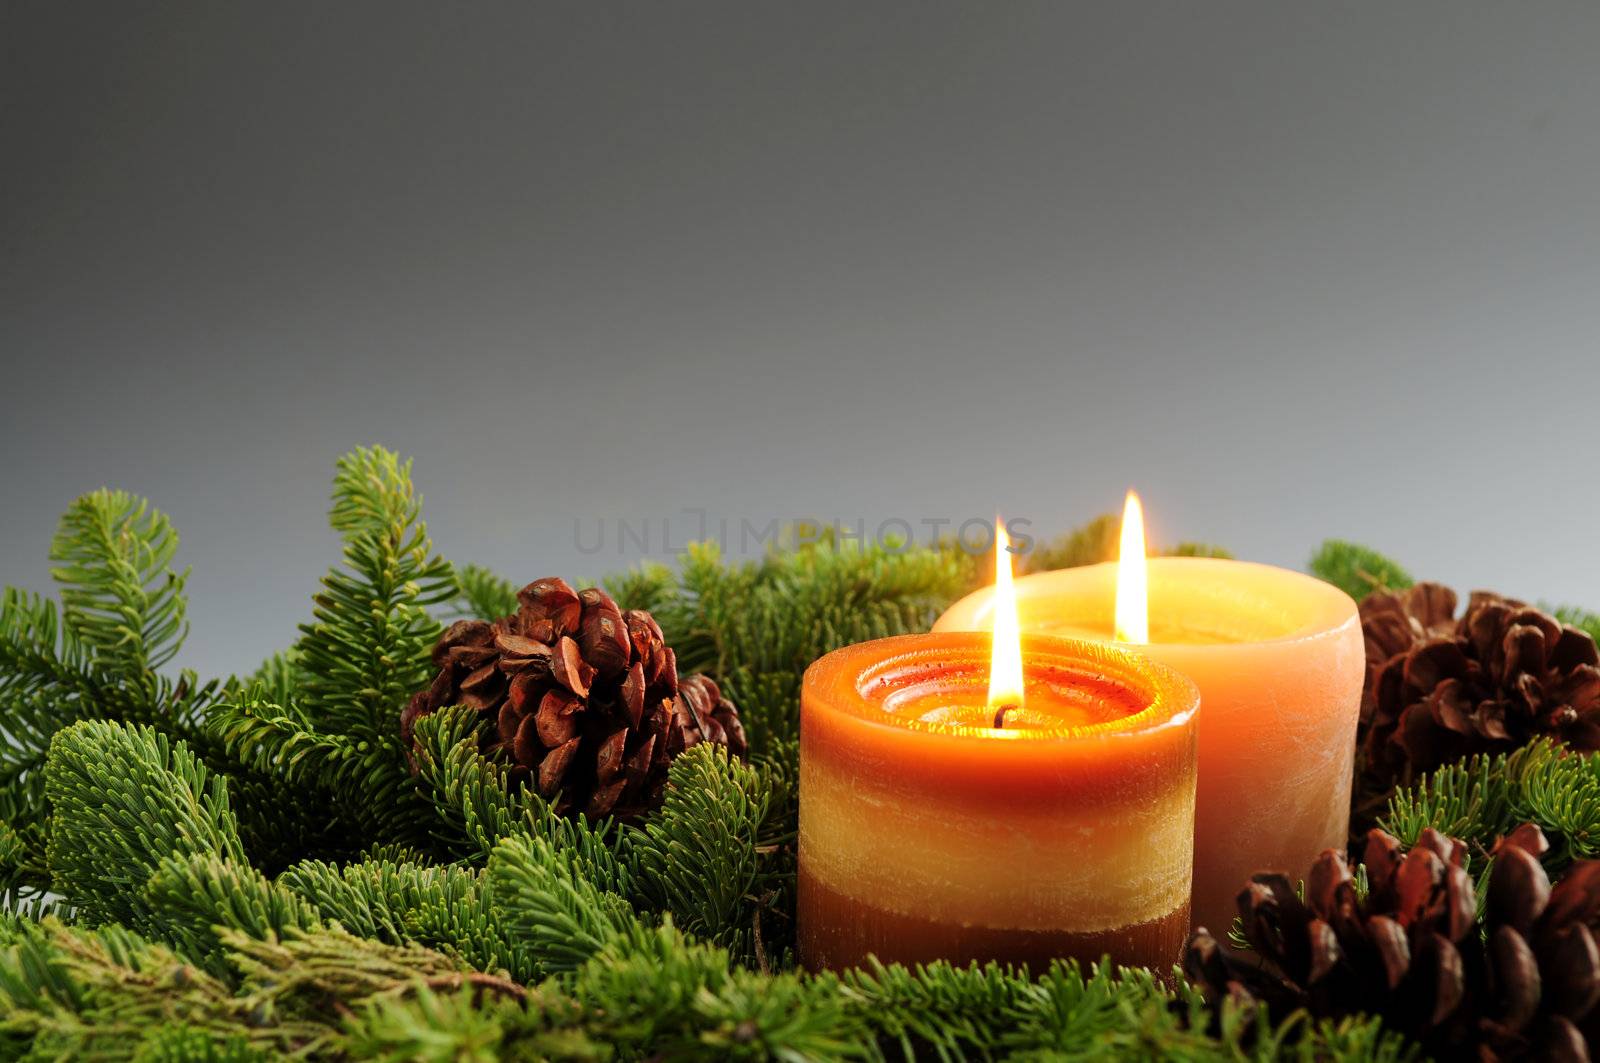 Christmas arrangement of burning candles and green spruce branches, background